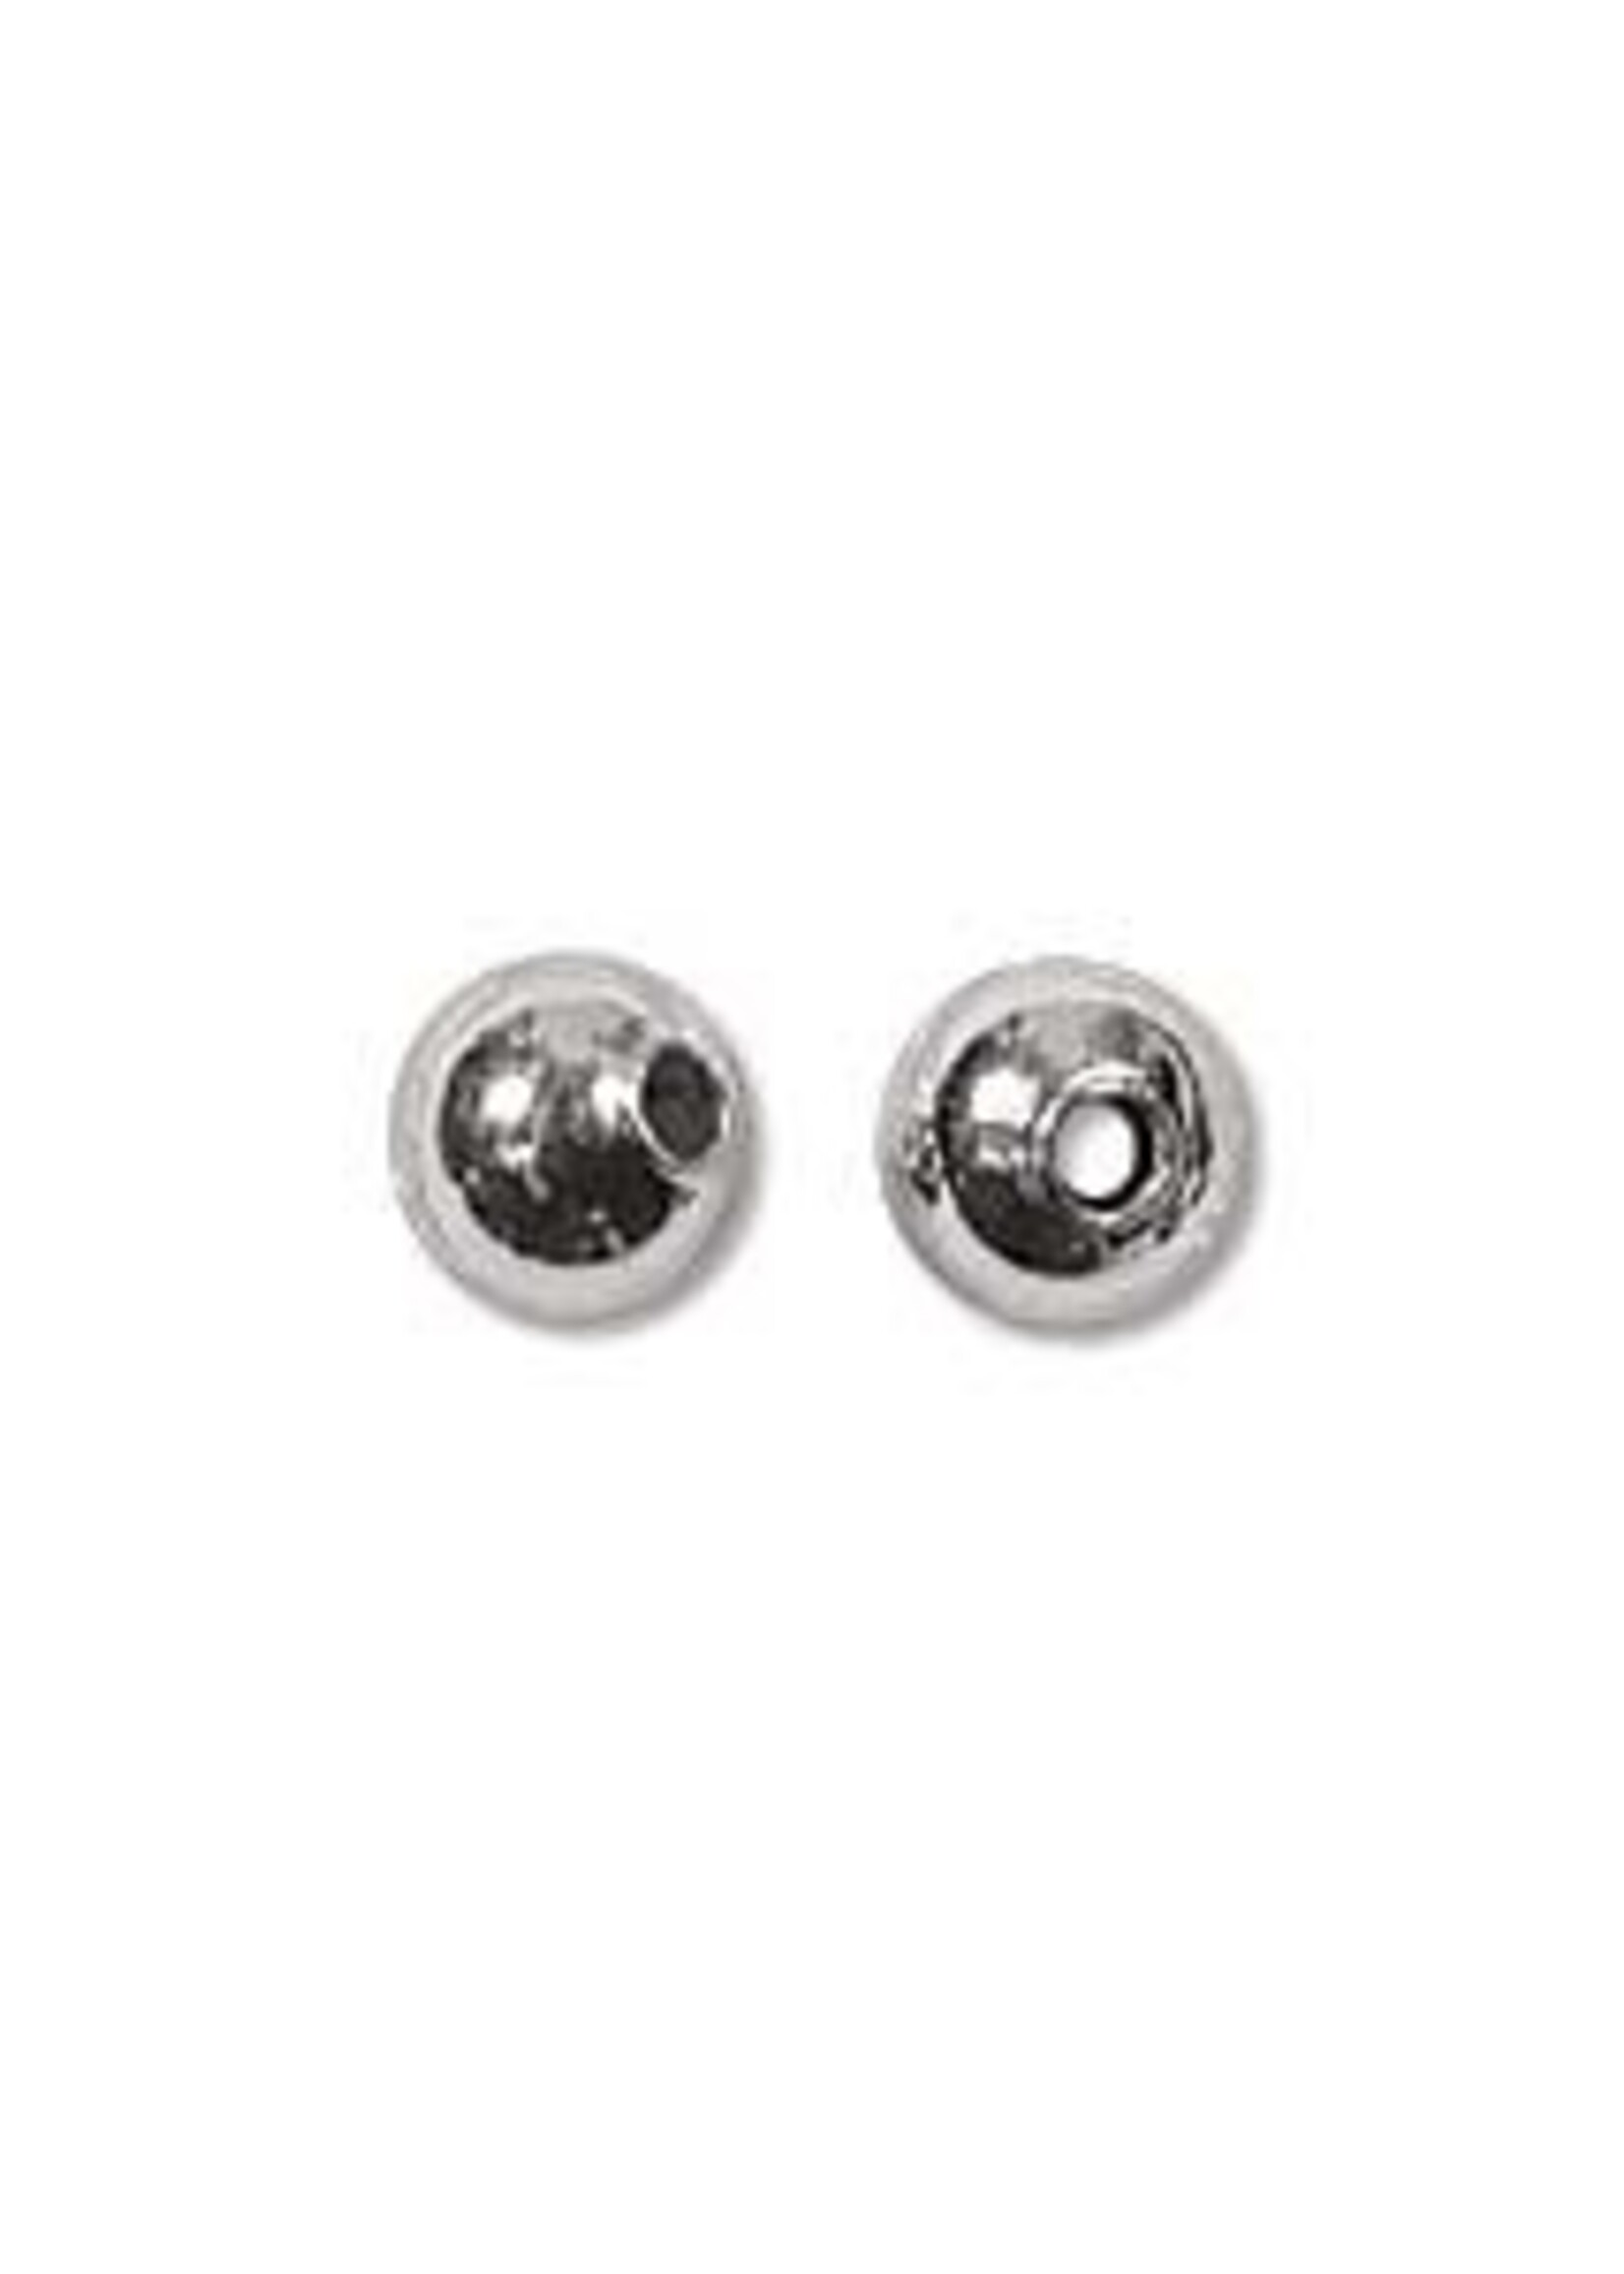 6mm Rounds Silver Plated Qt 20